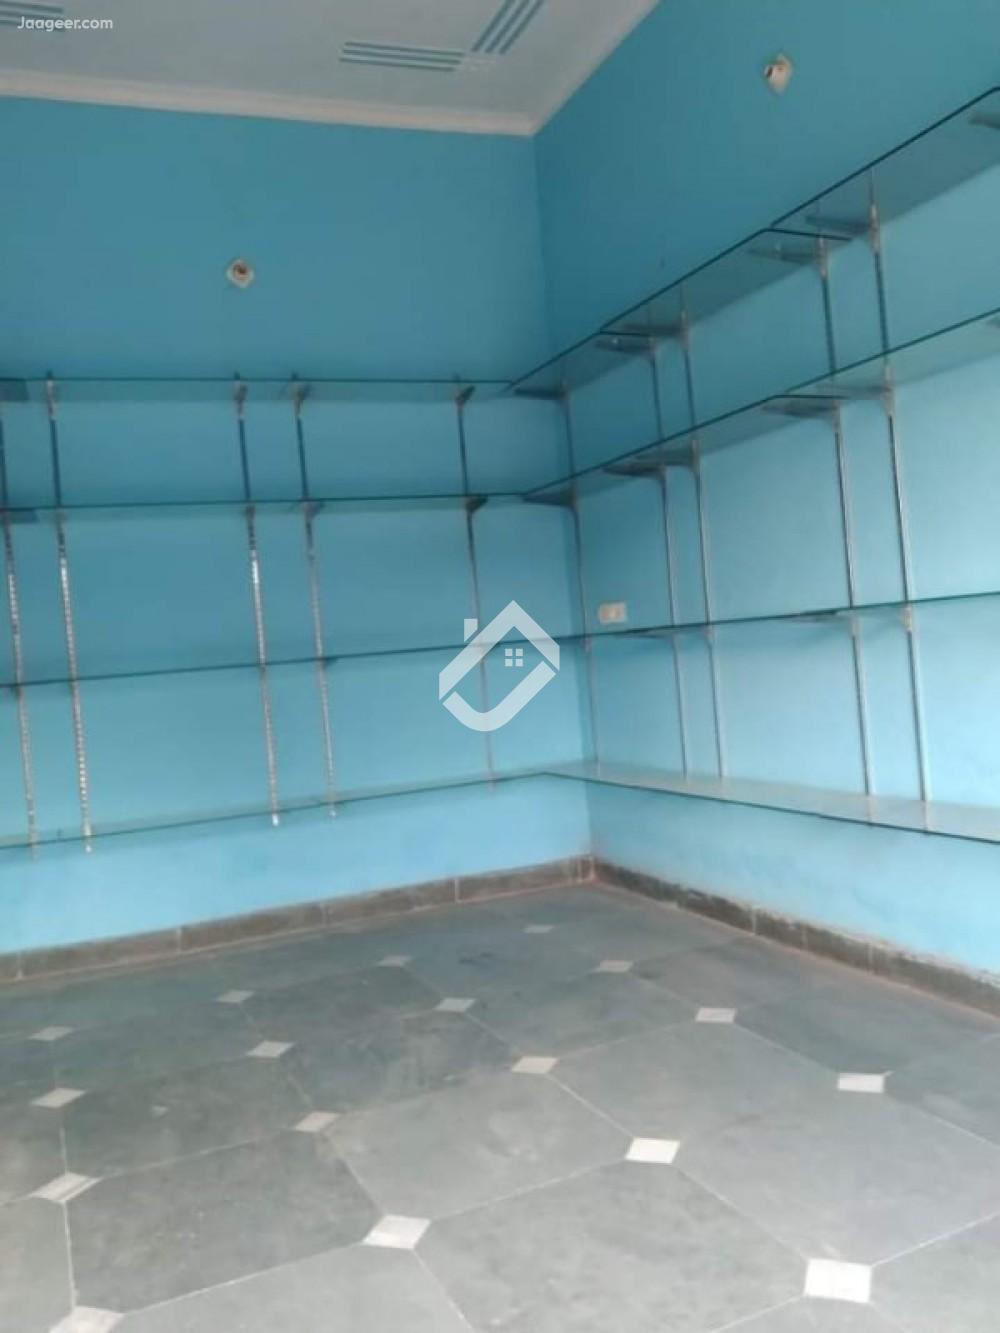 View  1 Marla Commercial Shop For Rent In Cheema Colony University Road   in Cheema Colony, Sargodha